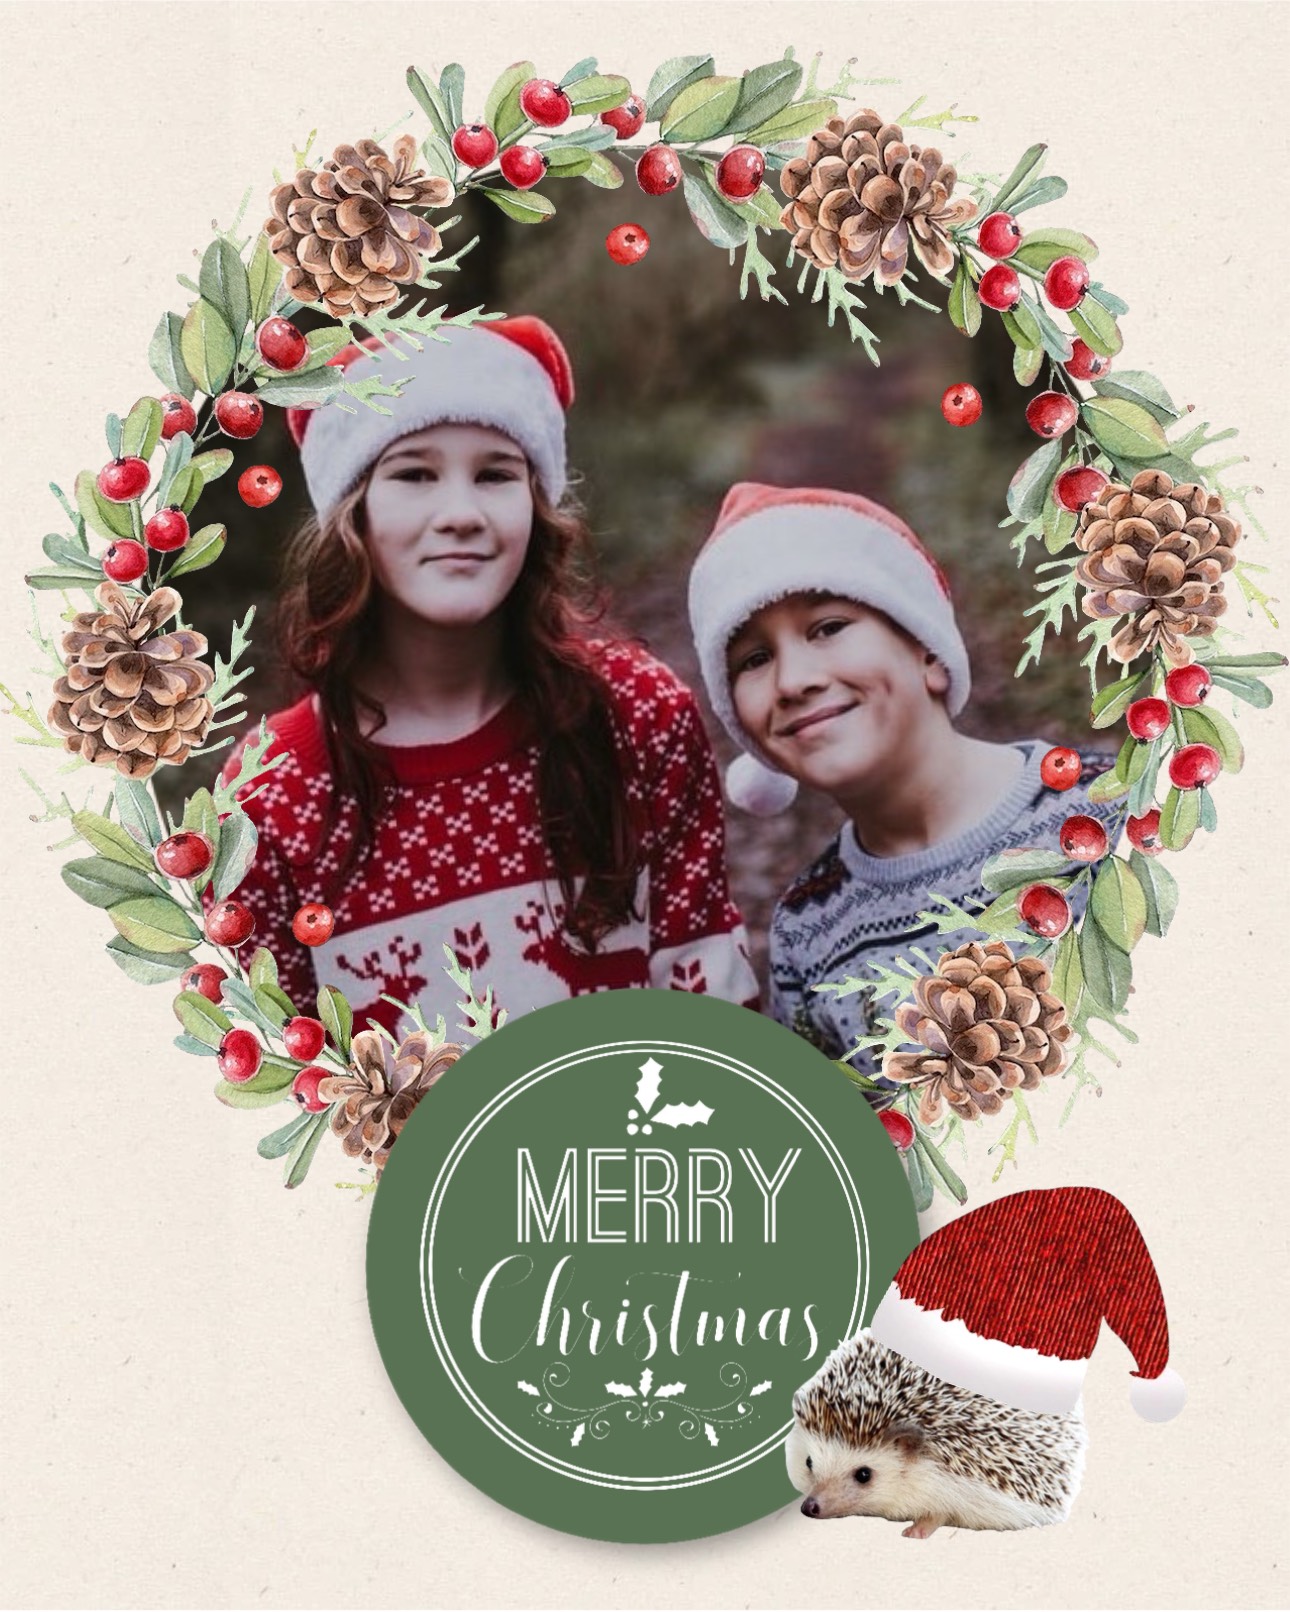 A Christmas Card With A Photo Of Two Children Merry Christmas Template